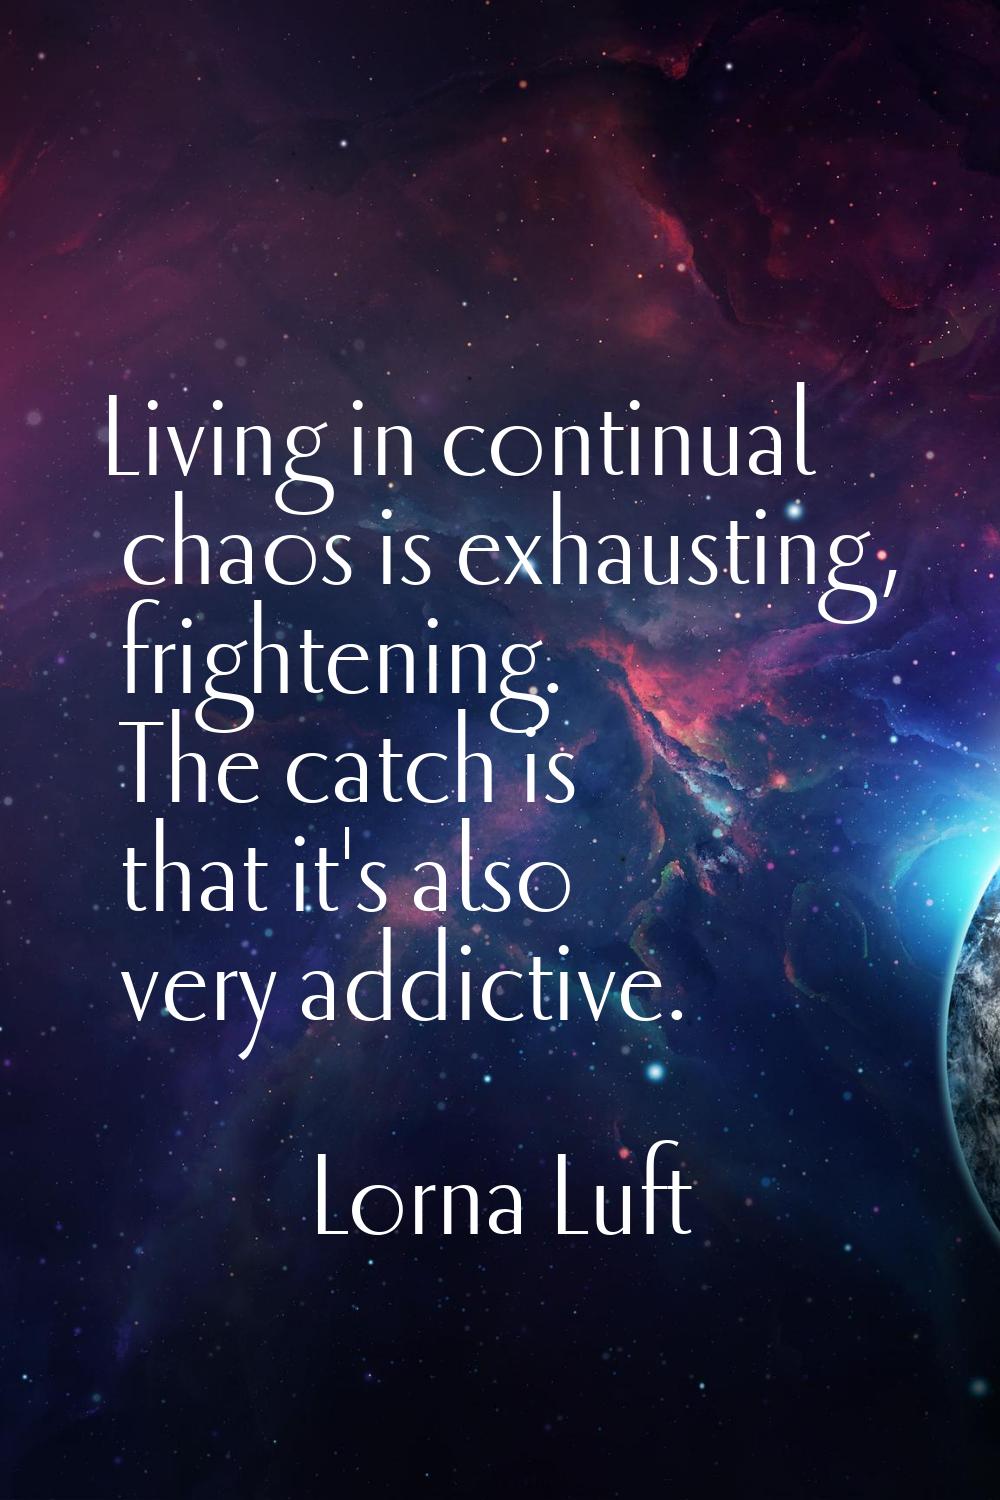 Living in continual chaos is exhausting, frightening. The catch is that it's also very addictive.